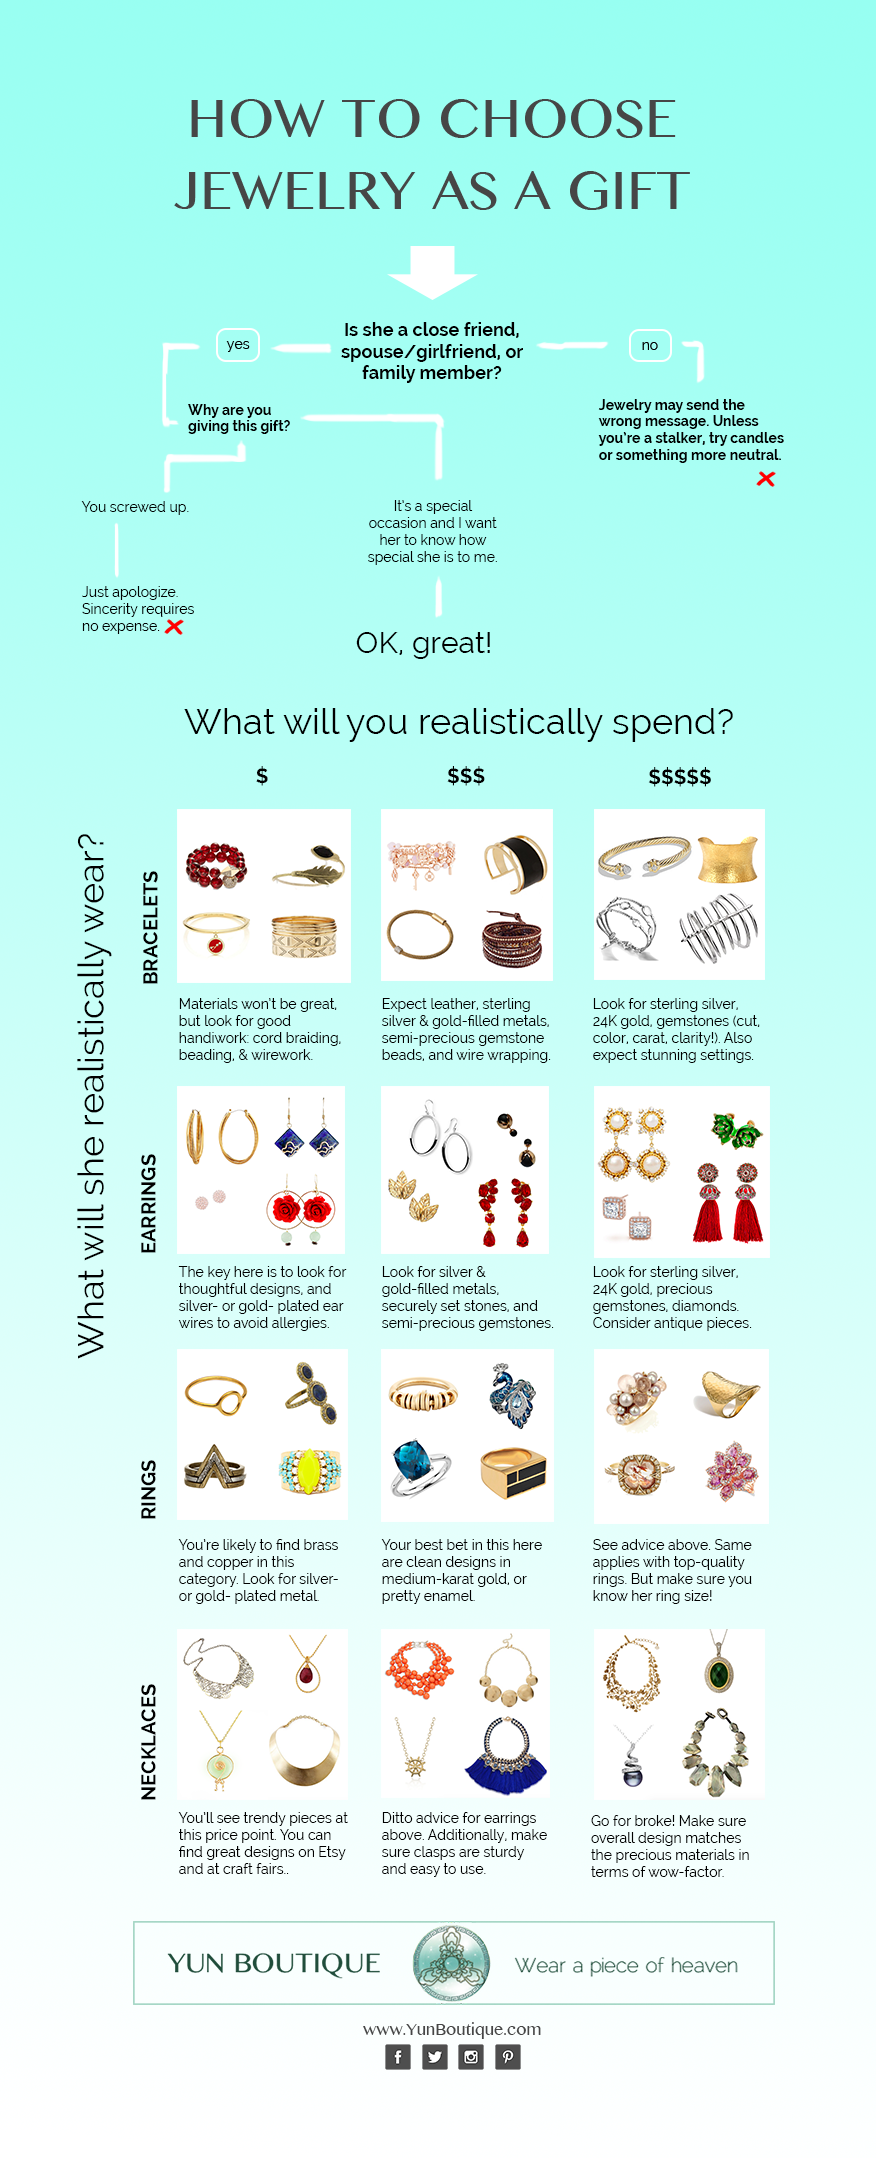 Follow this flowchart to choose the perfect jewelry gift. (Christine Lin/ Yun Boutique)